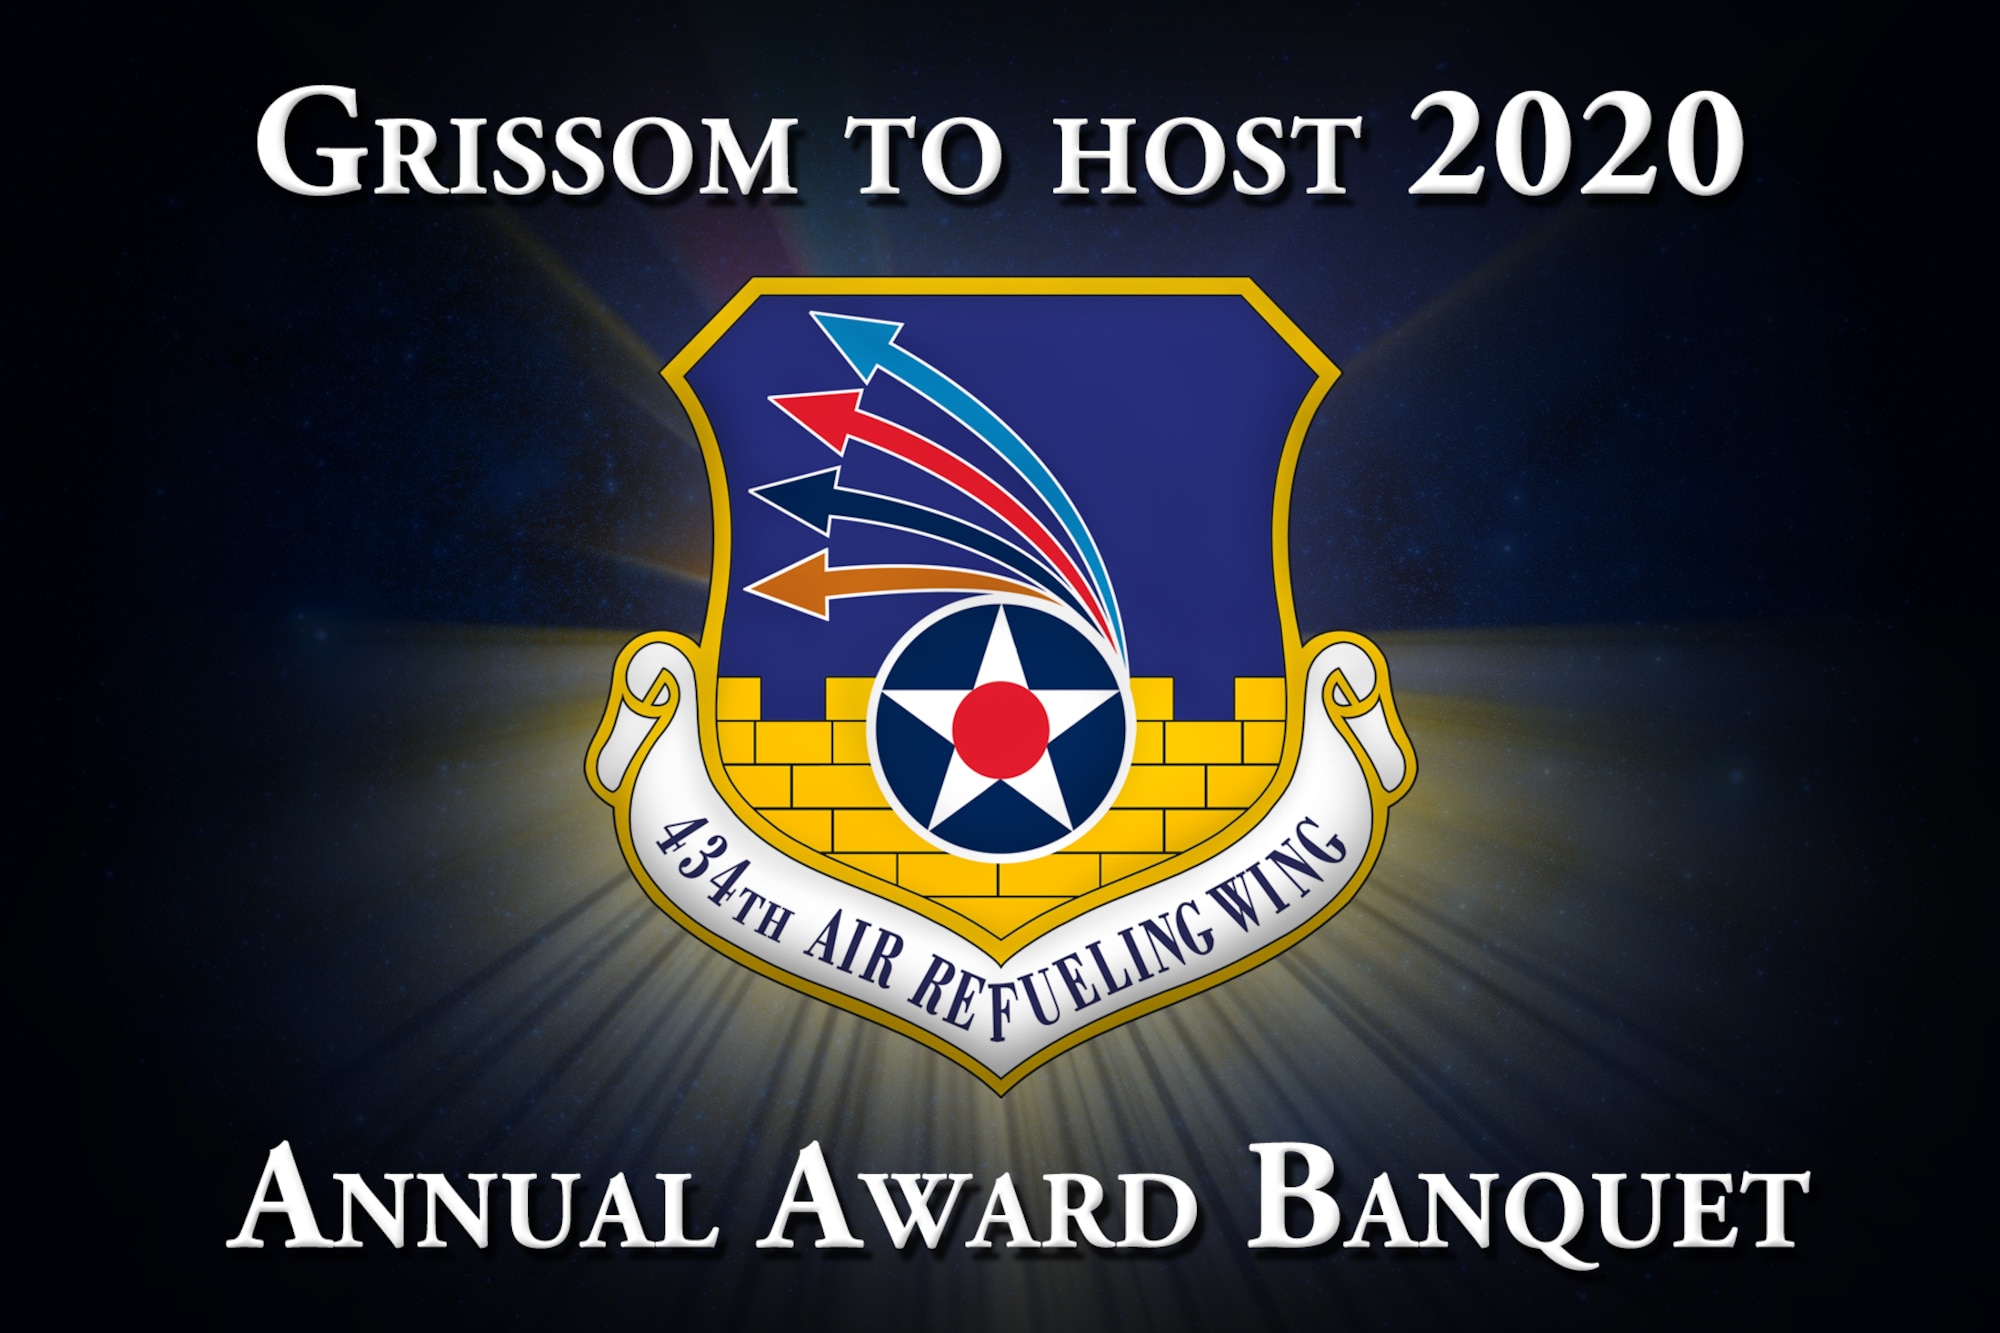 The Grissom annual awards banquet is scheduled for March 7, 2020. 
(U.S. Air Force graphic)